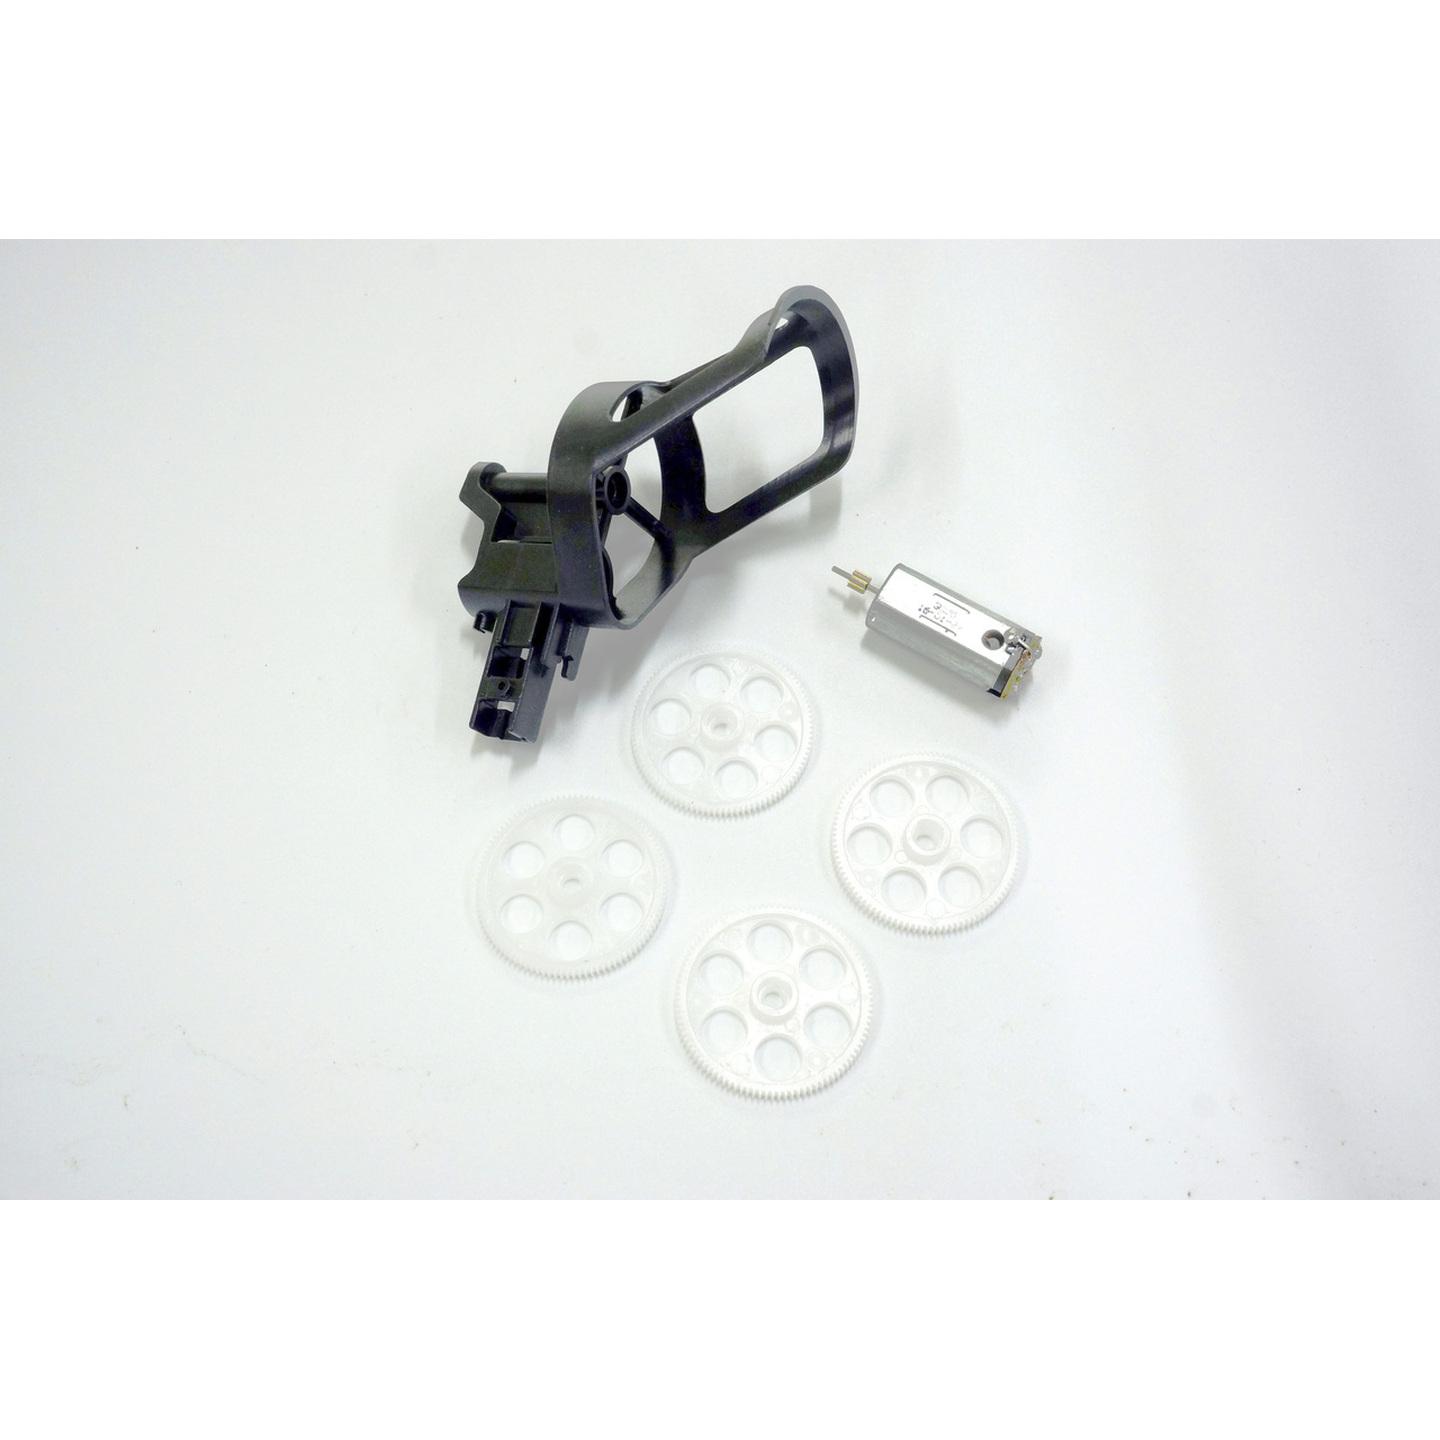 Spare Motor Assembly and Gear for GT-3895